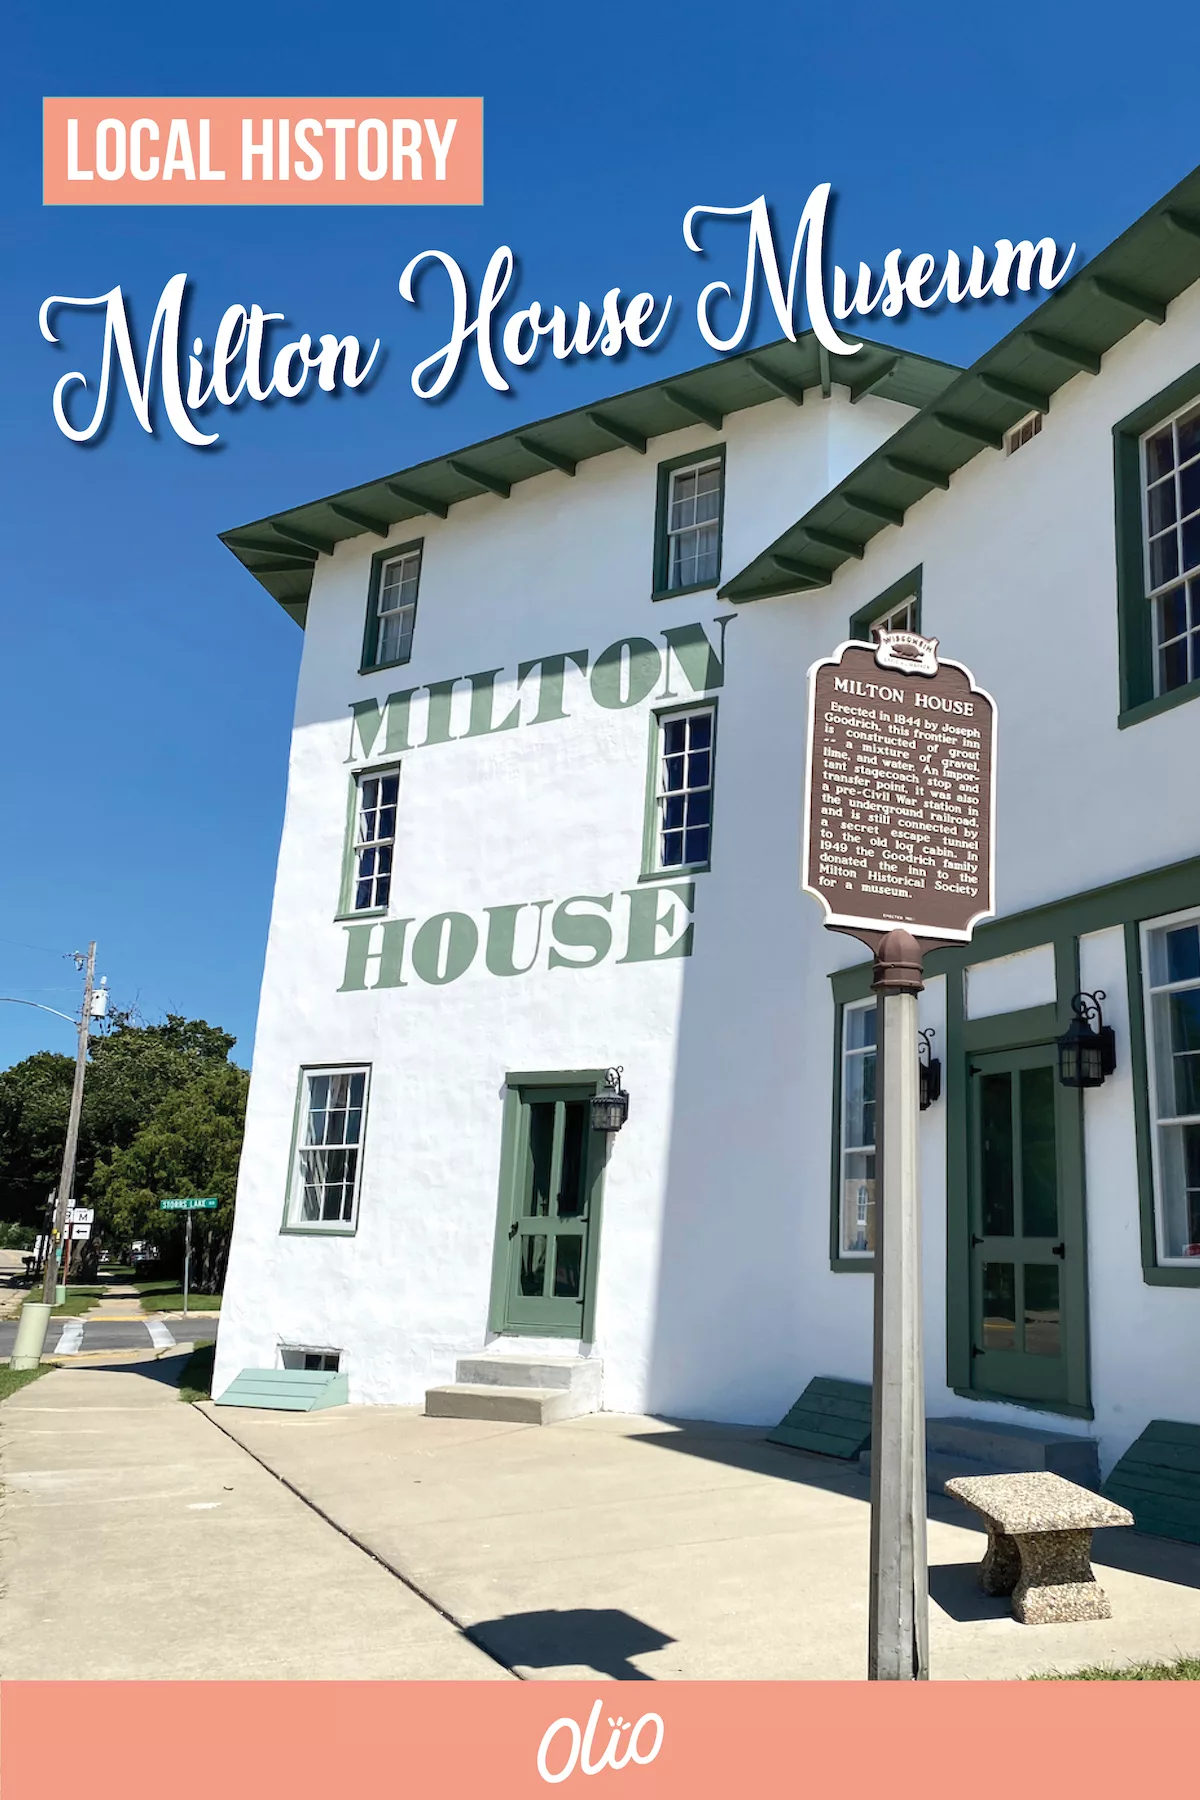 Experience abolitionist history firsthand in Milton, Wisconsin! Spend an afternoon at the Milton House Museum, the last certified Underground Railroad station in Wisconsin, and discover an important piece of American history. #Wisconsin #UndergroundRailroad